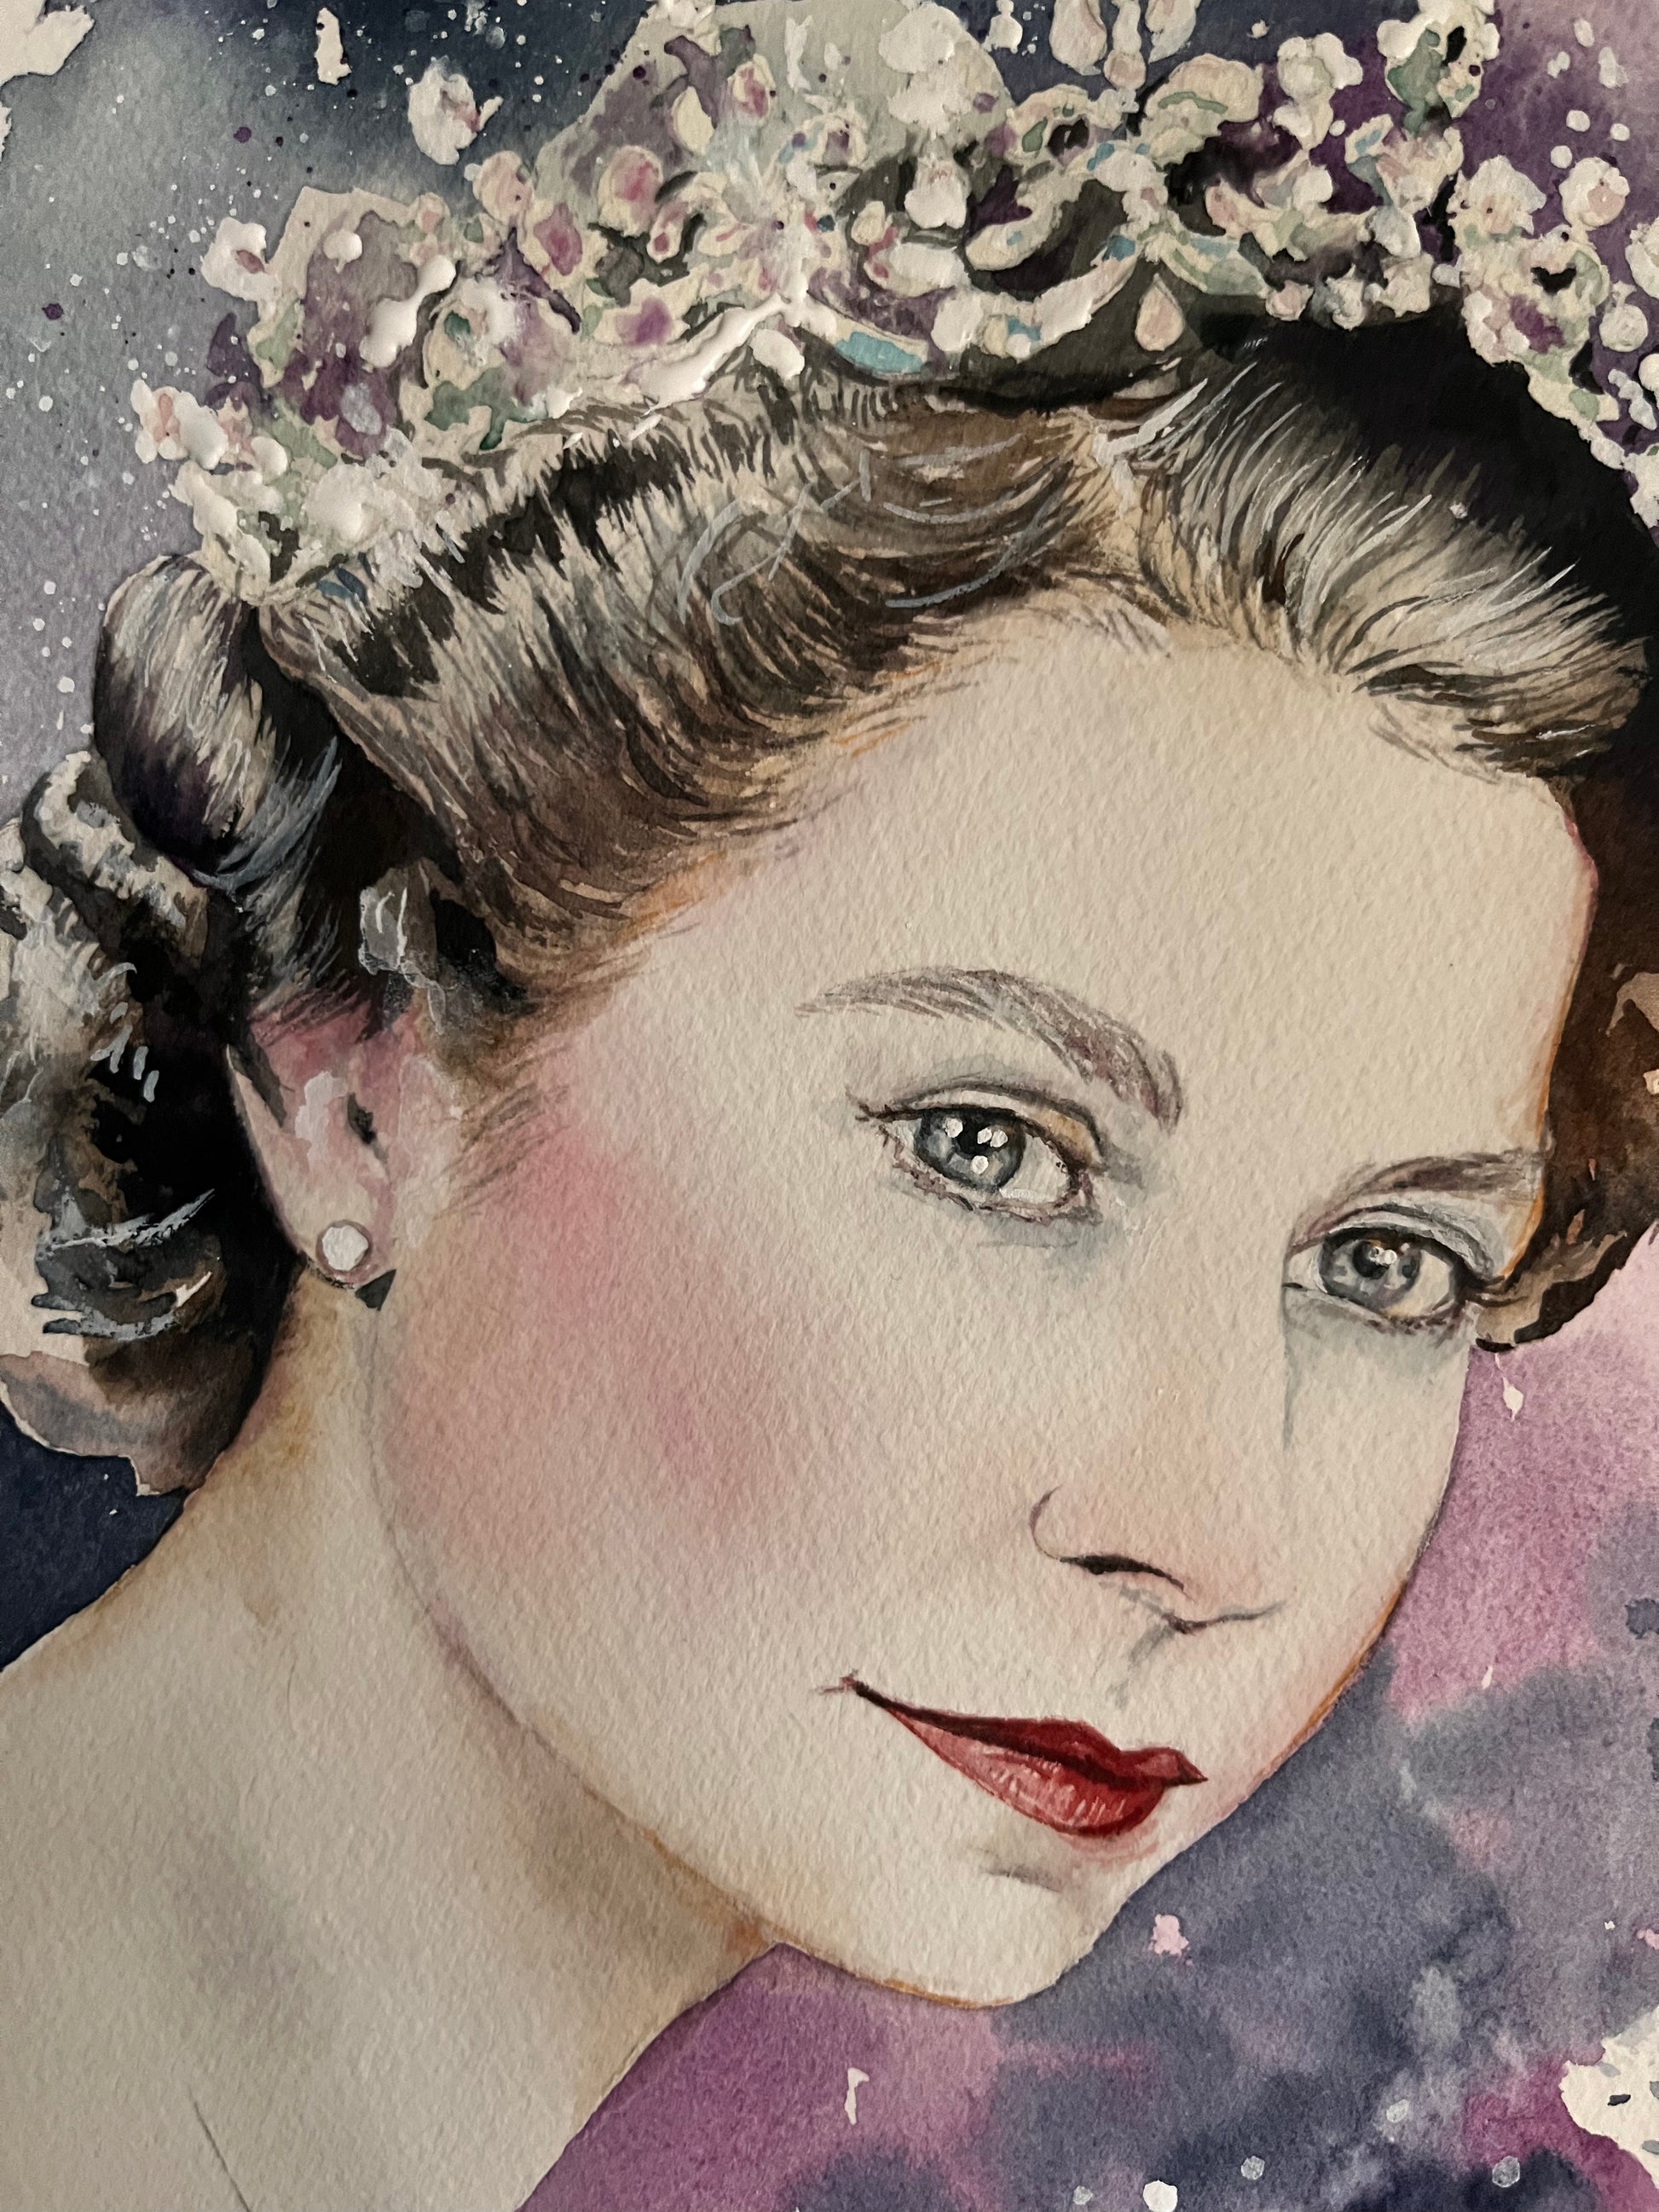 A close-up picture of the original watercolour painting of the late Queen Elizabeth II by Cleethorpes artist, Eve Leoni Smith. Limited edition prints are available to purchase. 